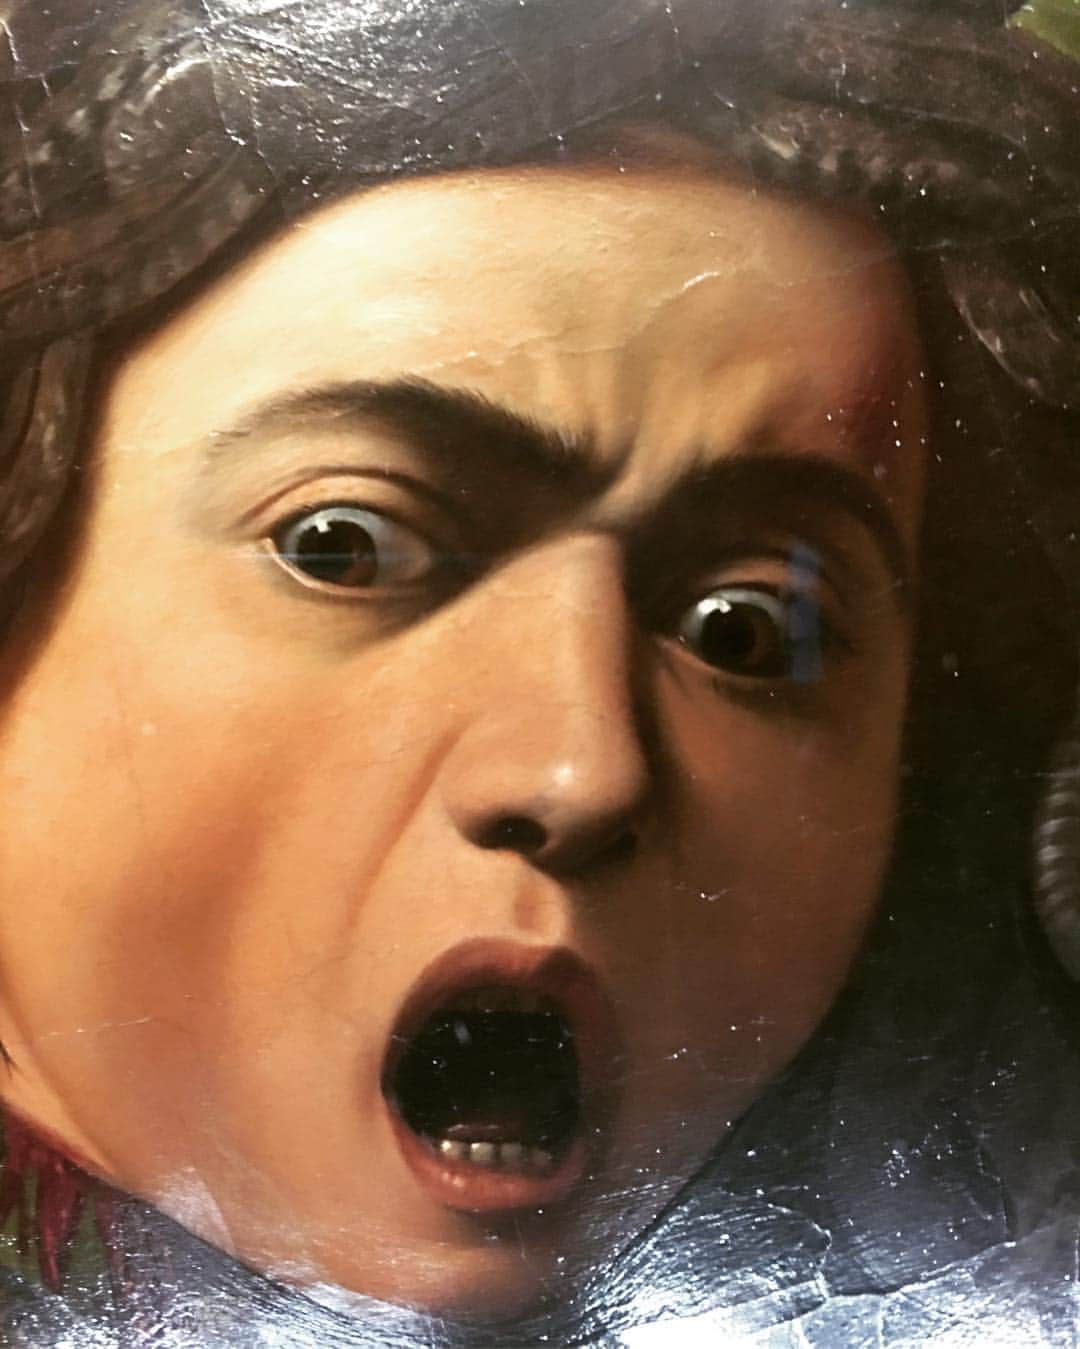 アンソニー・ボーディンのインスタグラム：「ON THE MEDUSA OF LEONARDO DA VINCI, IN THE FLORENTINE GALLERY.  I T lieth, gazing on the midnight sky,  Upon the cloudy mountain peak supine;  Below, far lands are seen tremblingly;  Its horror and its beauty are divine.  Upon its lips and eyelids seems to lie	5  Loveliness like a shadow, from which shrine,  Fiery and lurid, struggling underneath,  The agonies of anguish and of death.  Yet it is less the horror than the grace  Which turns the gazer's spirit into stone;	10  Whereon the lineaments of that dead face  Are graven, till the characters be grown  Into itself, and thought no more can trace; 'Tis the melodious hue of beauty thrown  Athwart the darkness and the glare of pain,	15  Which humanize and harmonize the strain.  And from its head as from one body grow,  As [ ] grass out of a watery rock,  Hairs which are vipers, and they curl and flow  And their long tangles in each other lock,	20  And with unending involutions shew  Their mailed radiance, as it were to mock  The torture and the death within, and saw  The solid air with many a ragged jaw.  And from a stone beside, a poisonous eft	25  Peeps idly into those Gorgonian eyes;  Whilst in the air a ghastly bat, bereft  Of sense, has flitted with a mad surprise  Out of the cave this hideous light had cleft,  And he comes hastening like a moth that hies	30  After a taper; and the midnight sky  Flares, a light more dread than obscurity. 'Tis the tempestuous loveliness of terror;  For from the serpents gleams a brazen glare  Kindled by that inextricable error,	35  Which makes a thrilling vapour of the air  Become a [ ] and ever-shifting mirror  Of all the beauty and the terror there-  A woman's countenance, with serpent locks,  Gazing in death on heaven from those wet rocks.  Shelley」